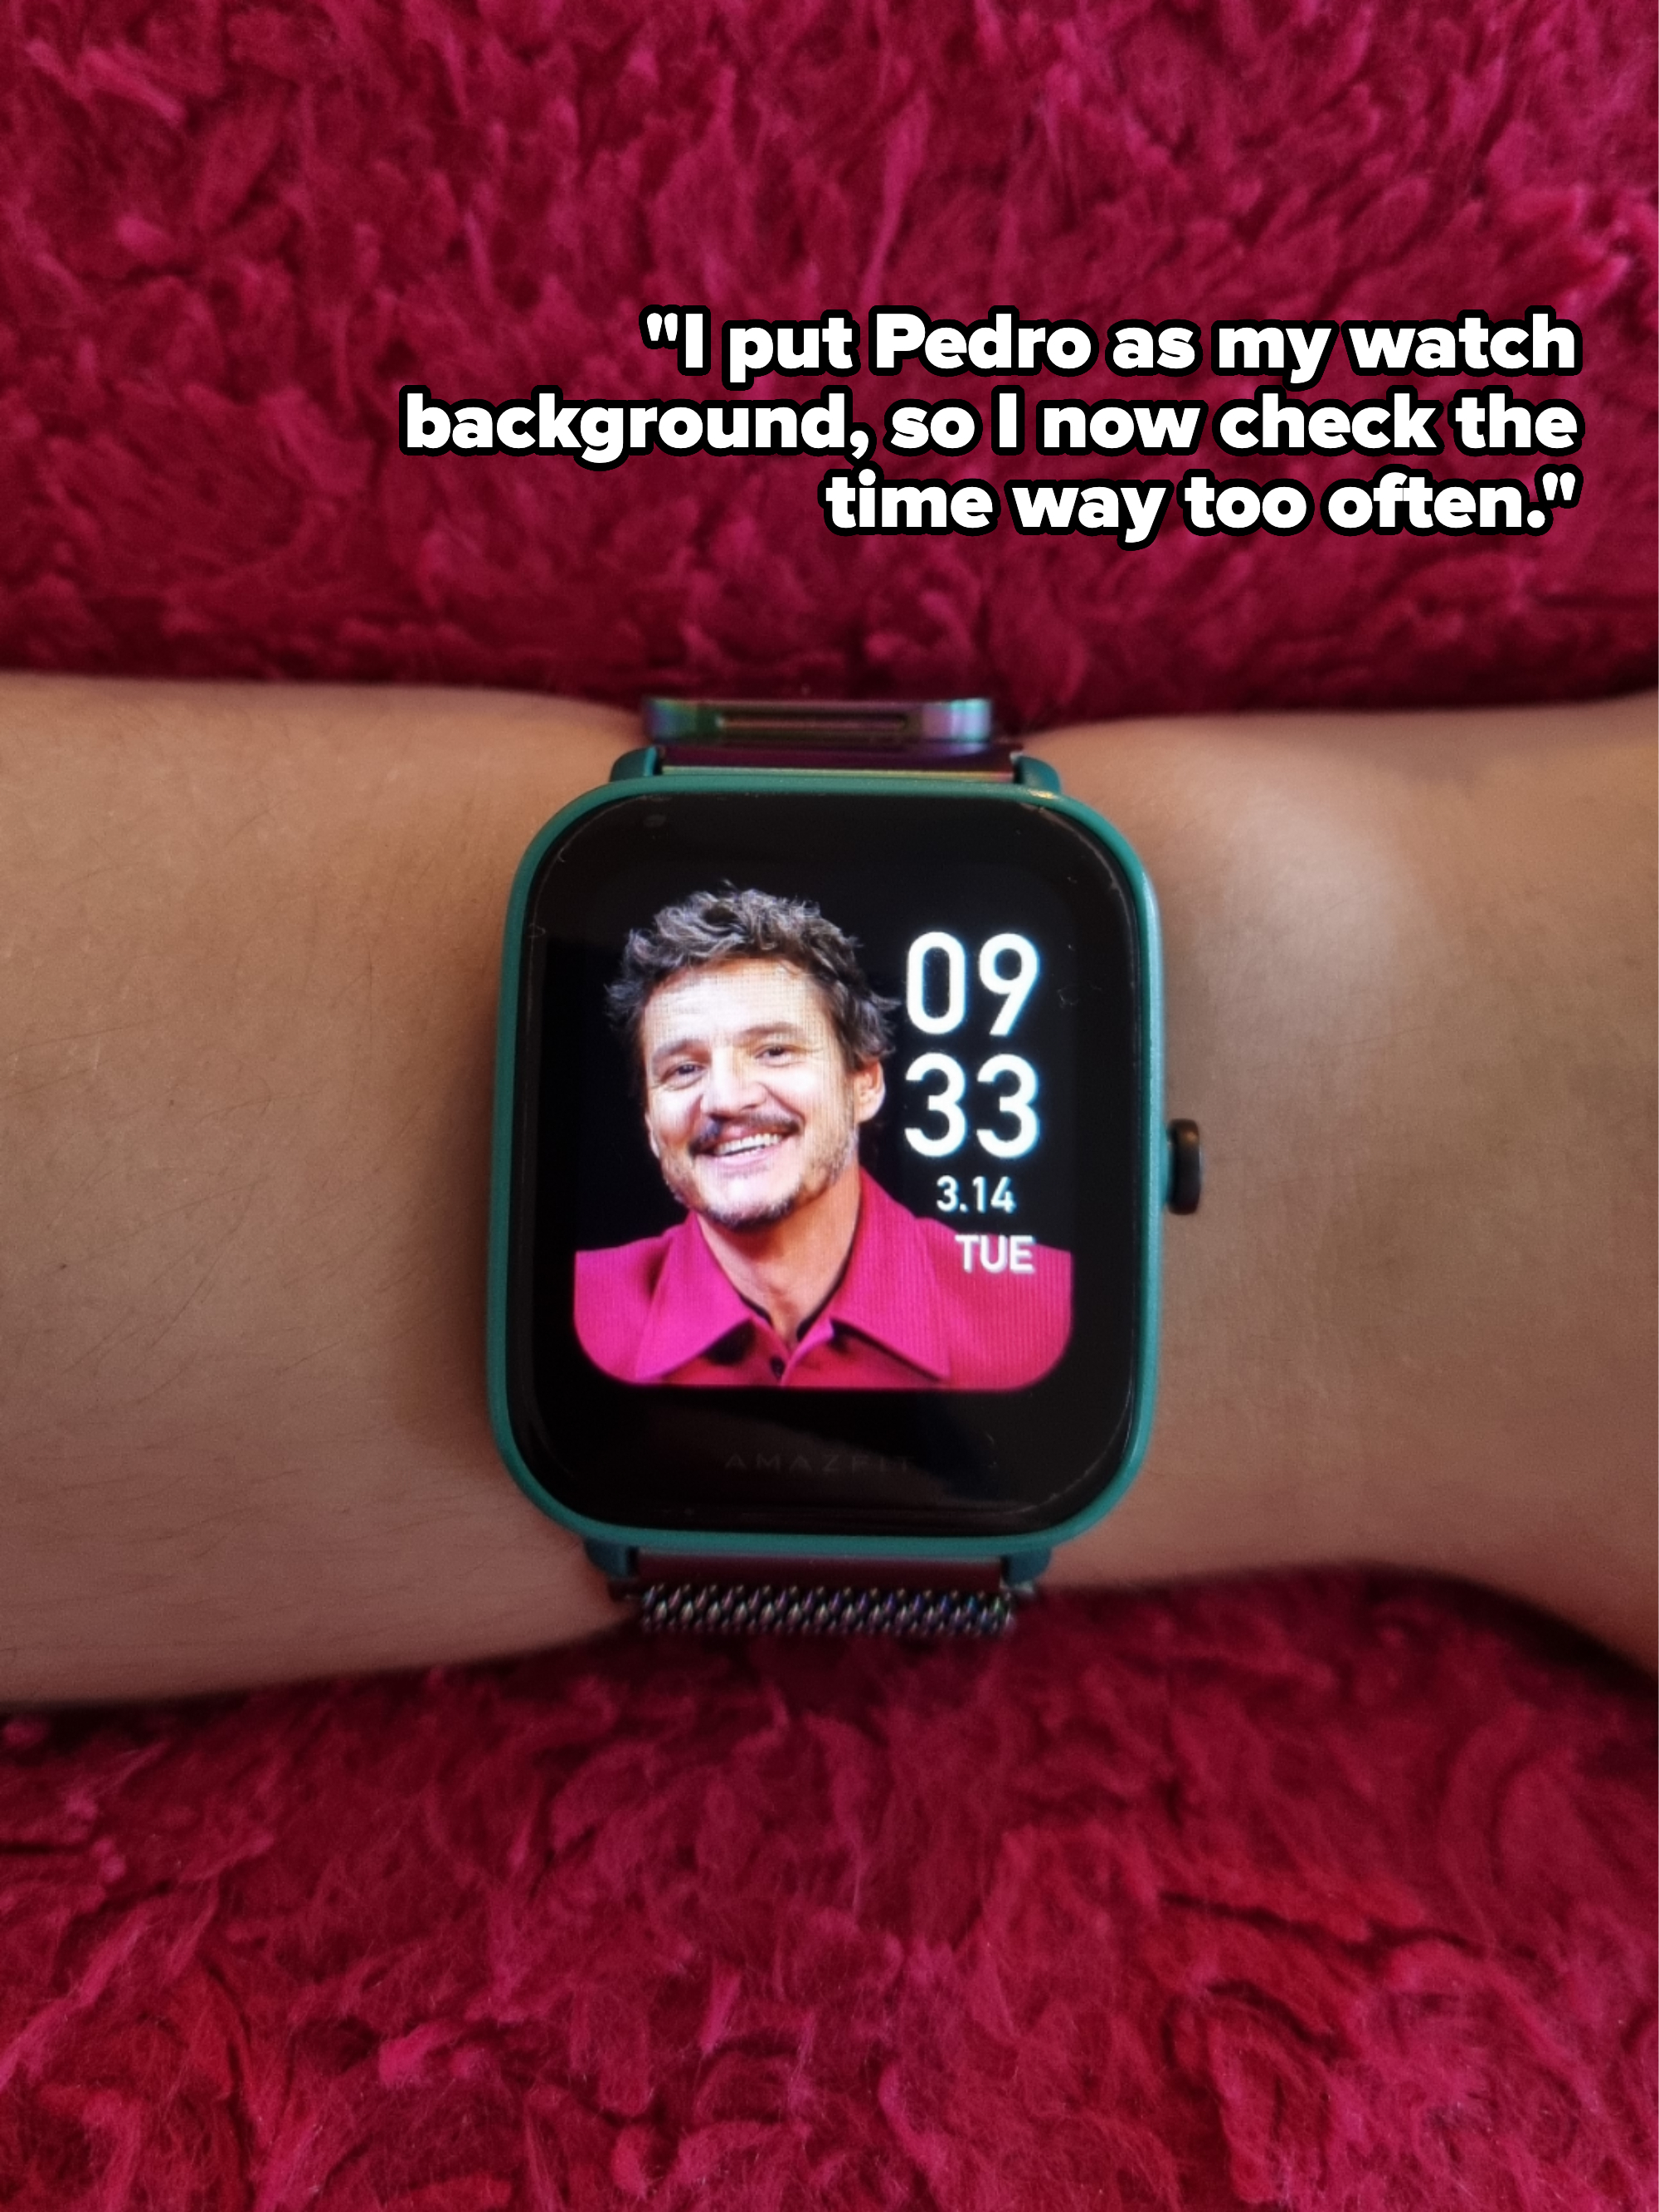 Smartwatch on wrist showing a picture of smiling man and displaying time 09:33, date 3.14 Tuesday